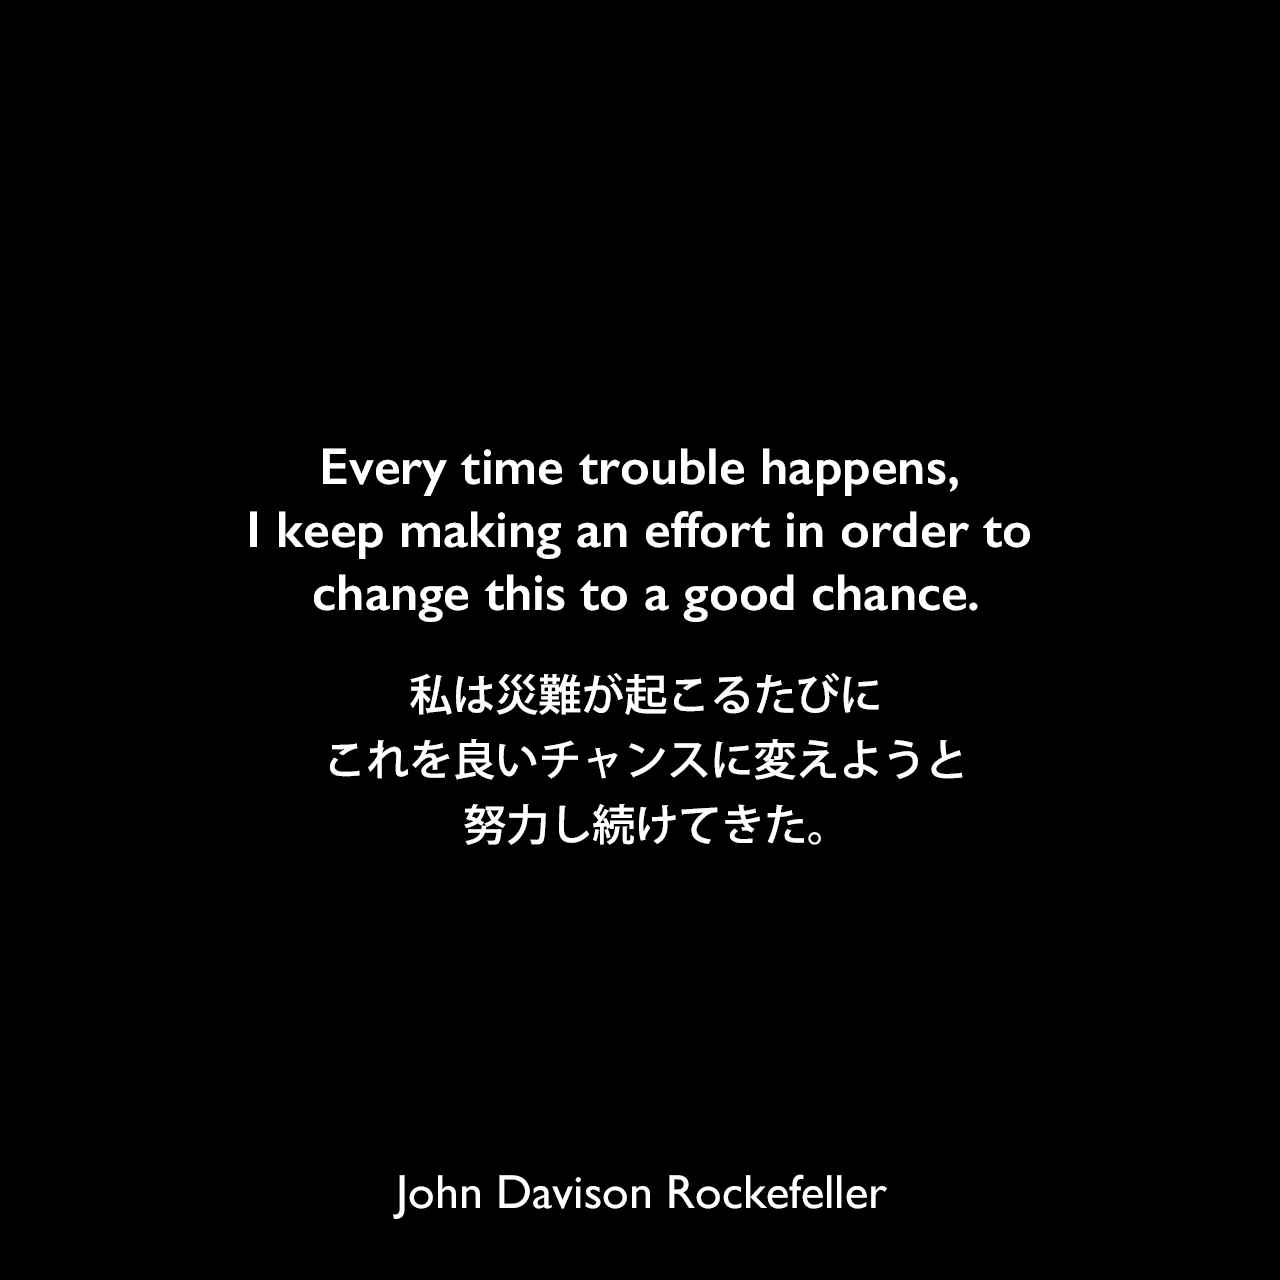 Every time trouble happens, I keep making an effort in order to change this to a good chance.私は災難が起こるたびに、これを良いチャンスに変えようと努力し続けてきた。John Davison Rockefeller